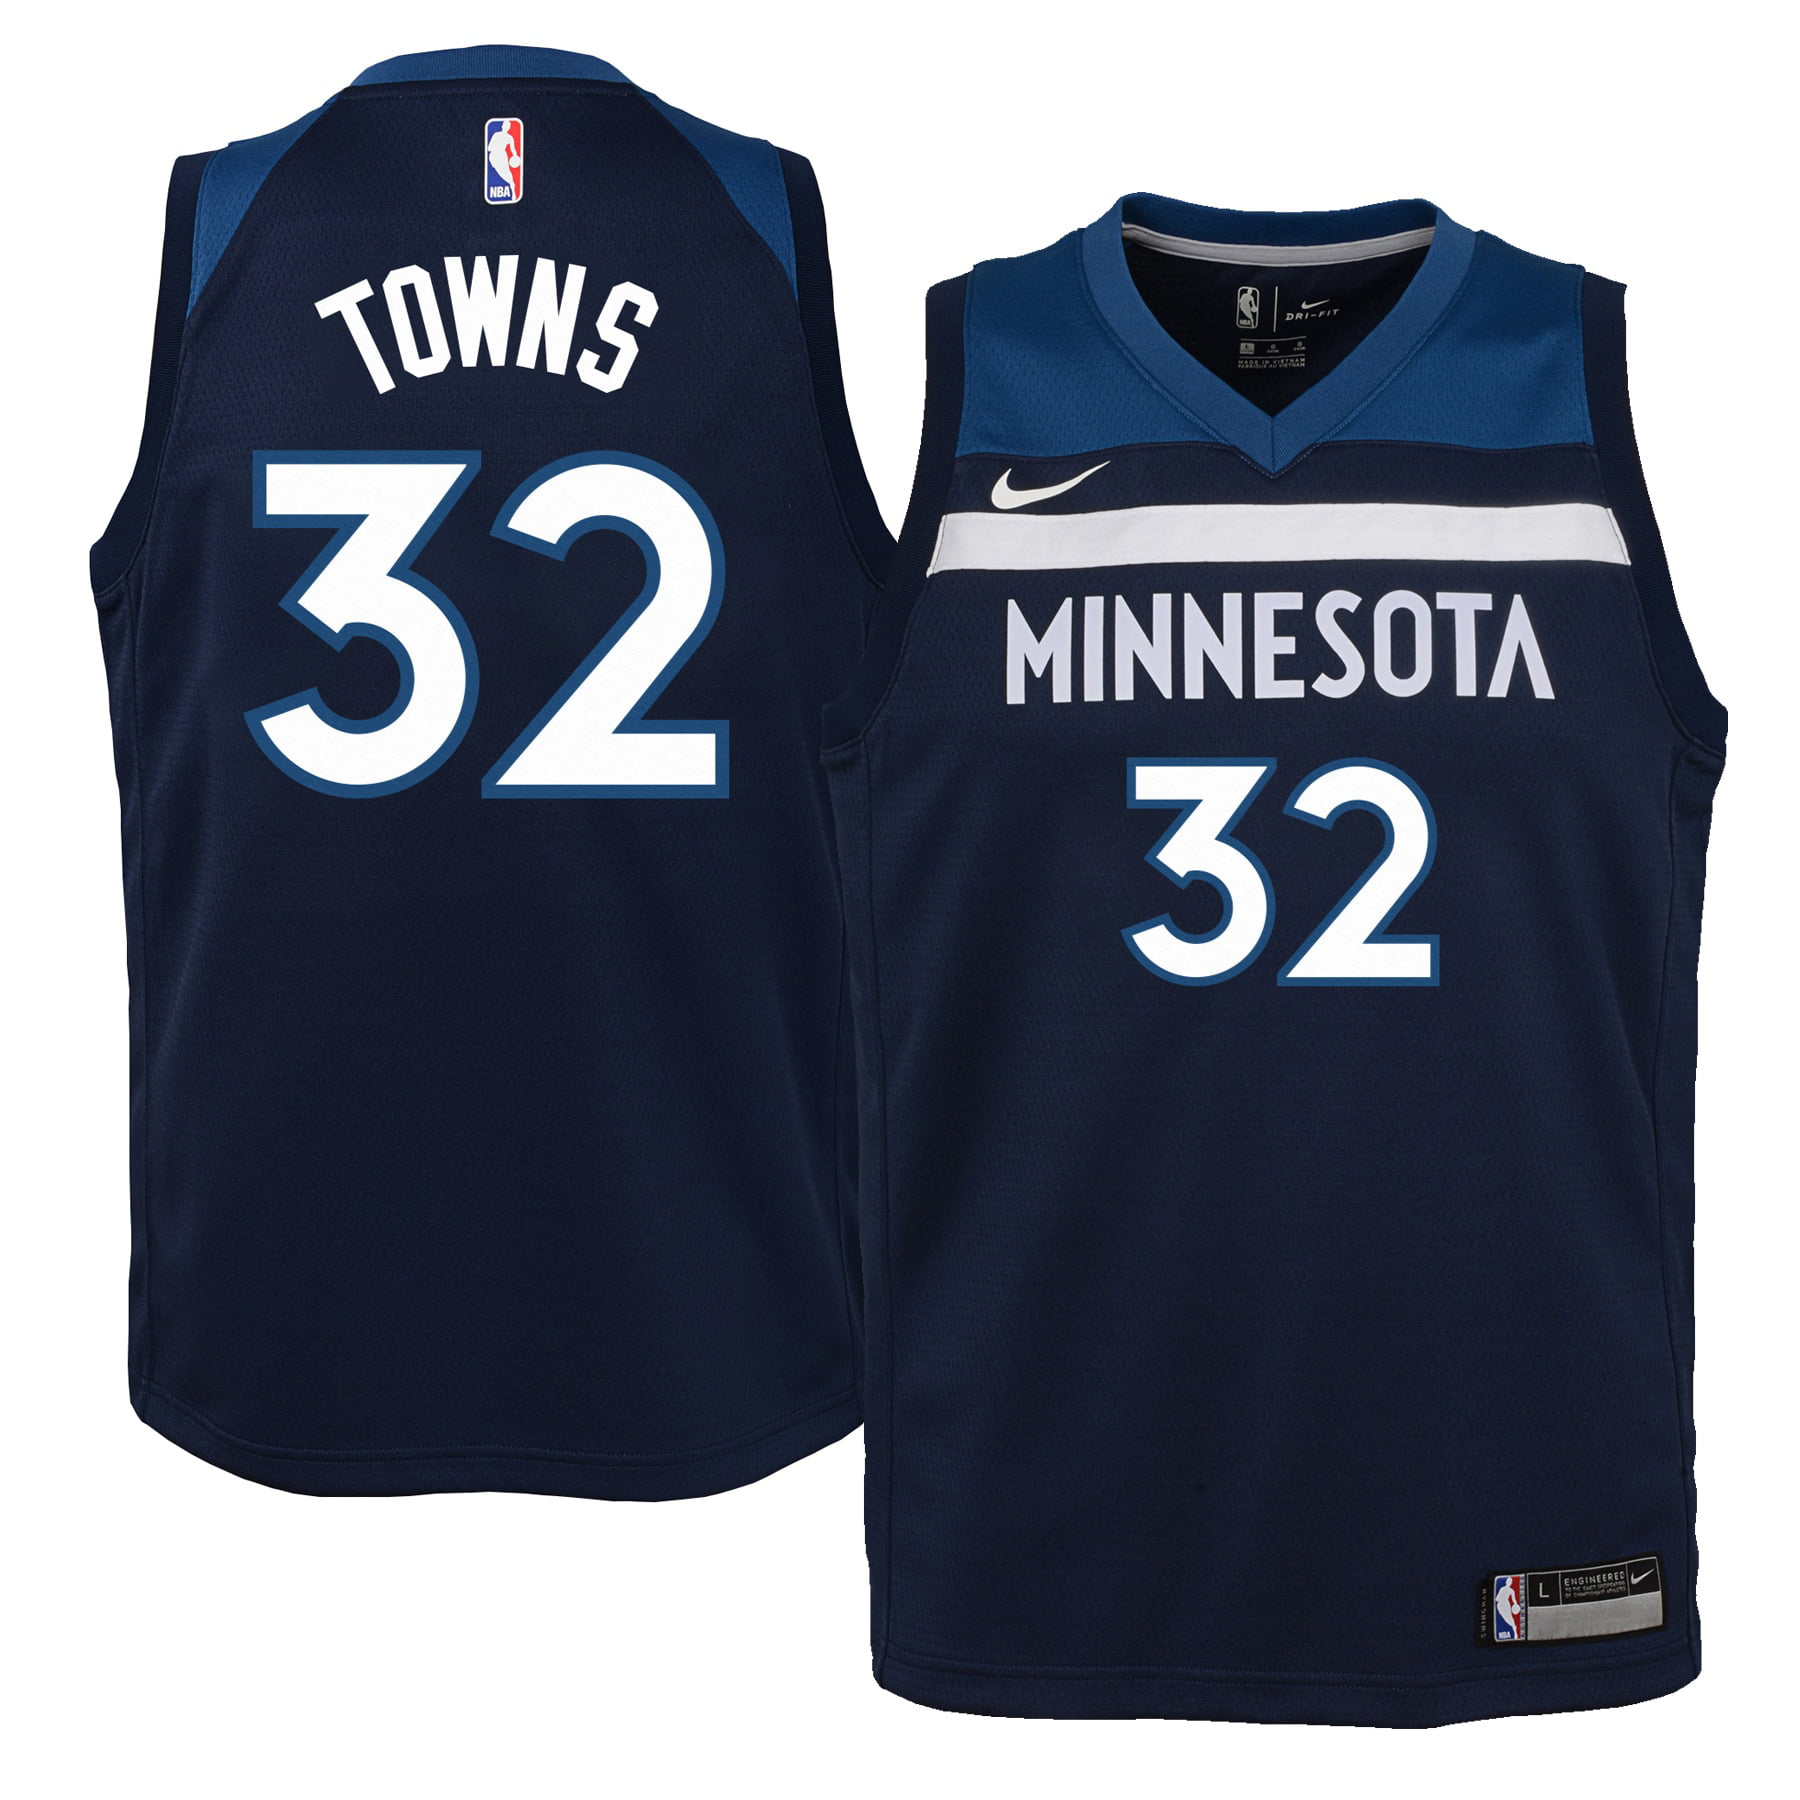 karl anthony towns youth jersey